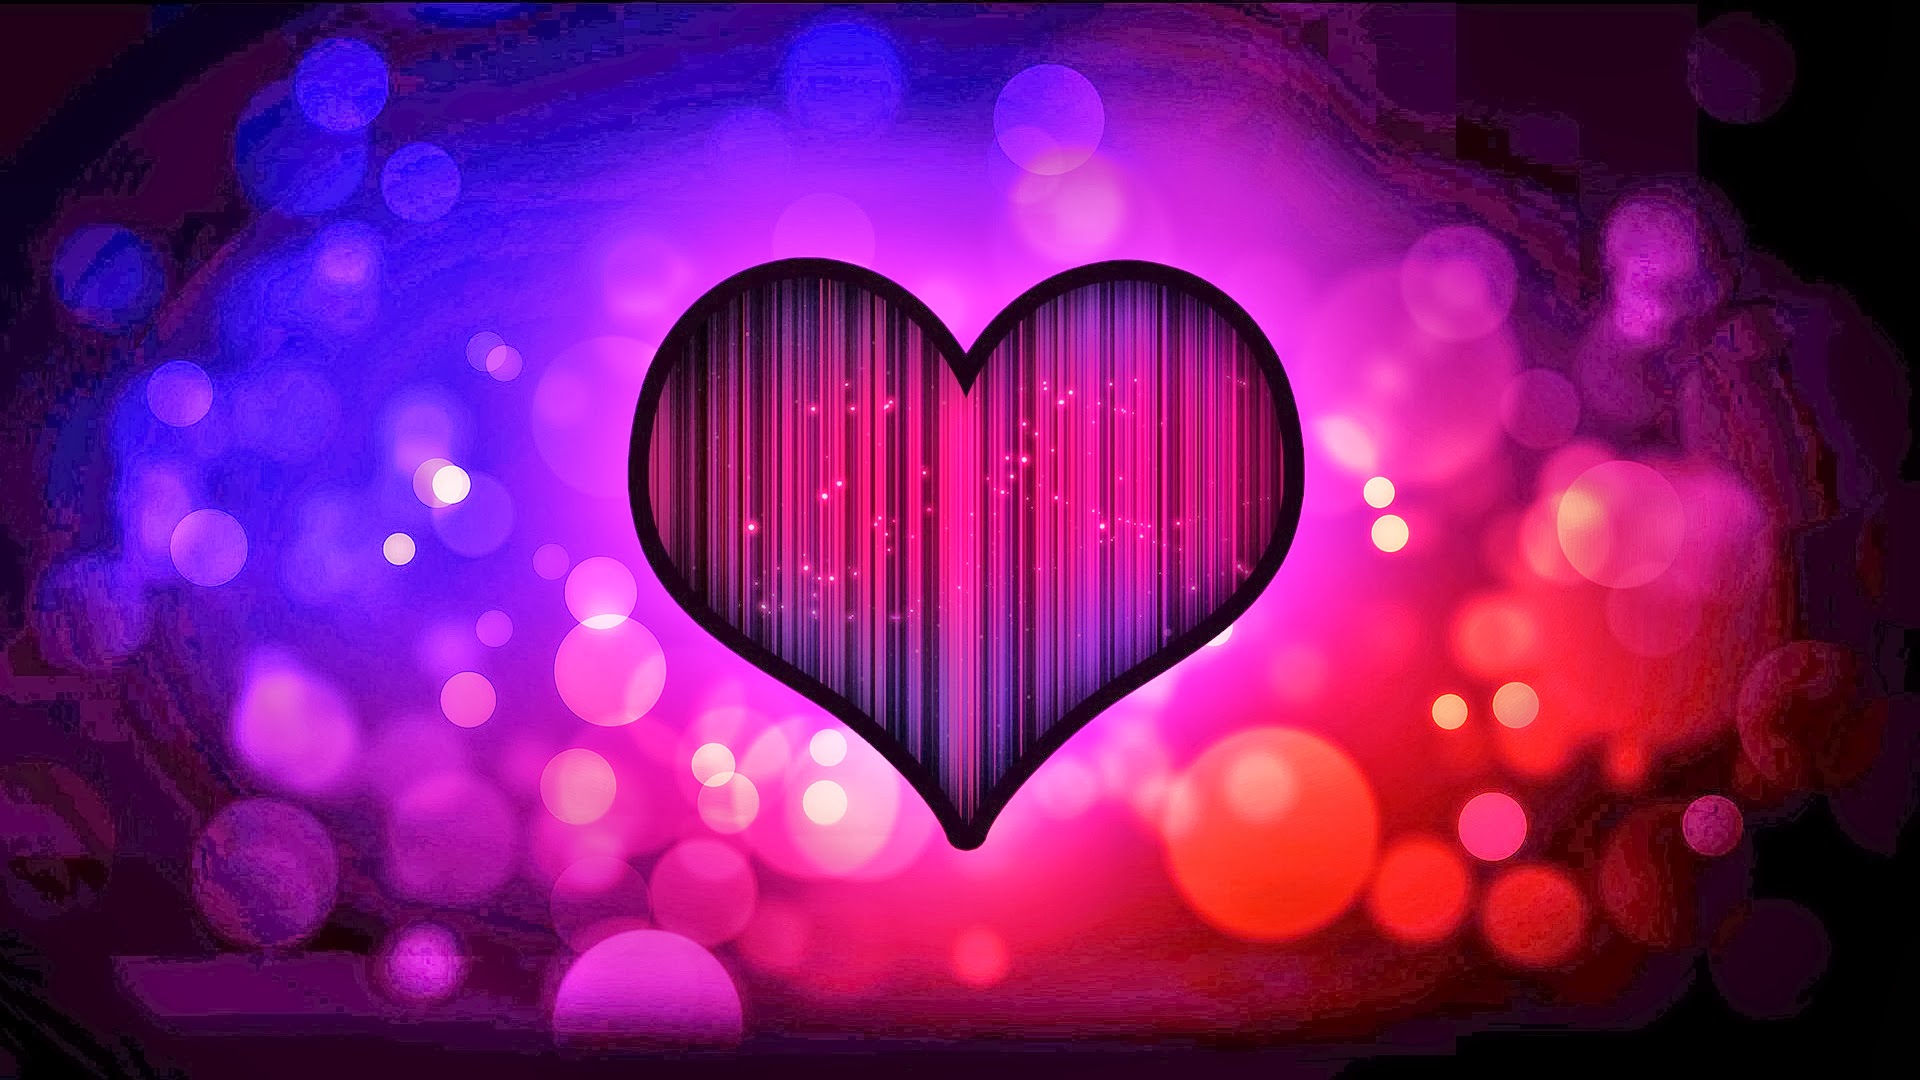 Gallery For Gt HD Abstract Love Wallpaper